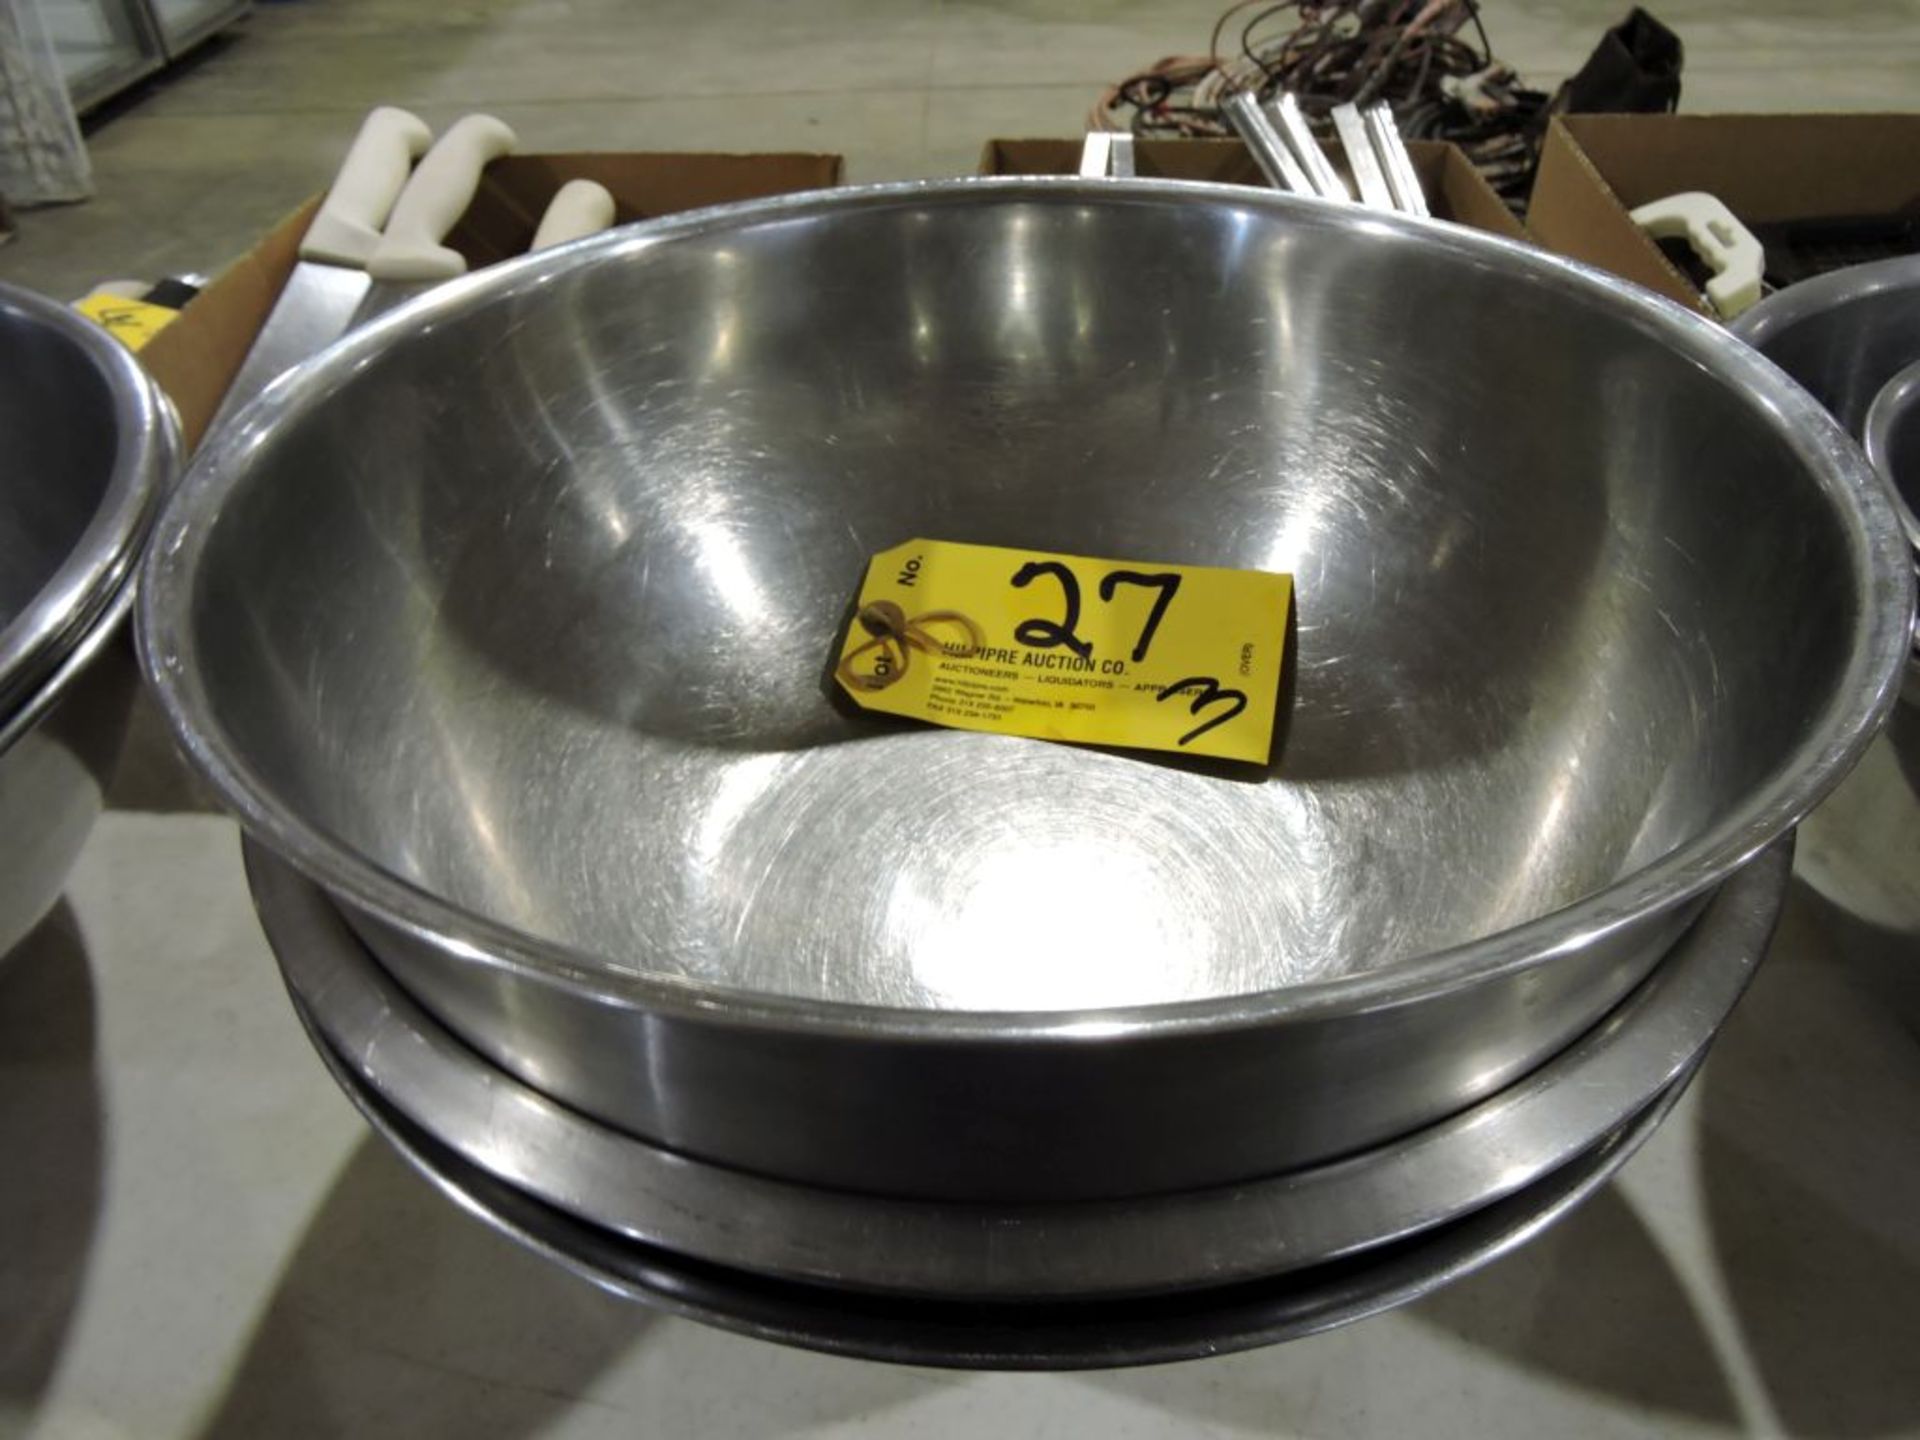 Stainless steel mixing bowls.